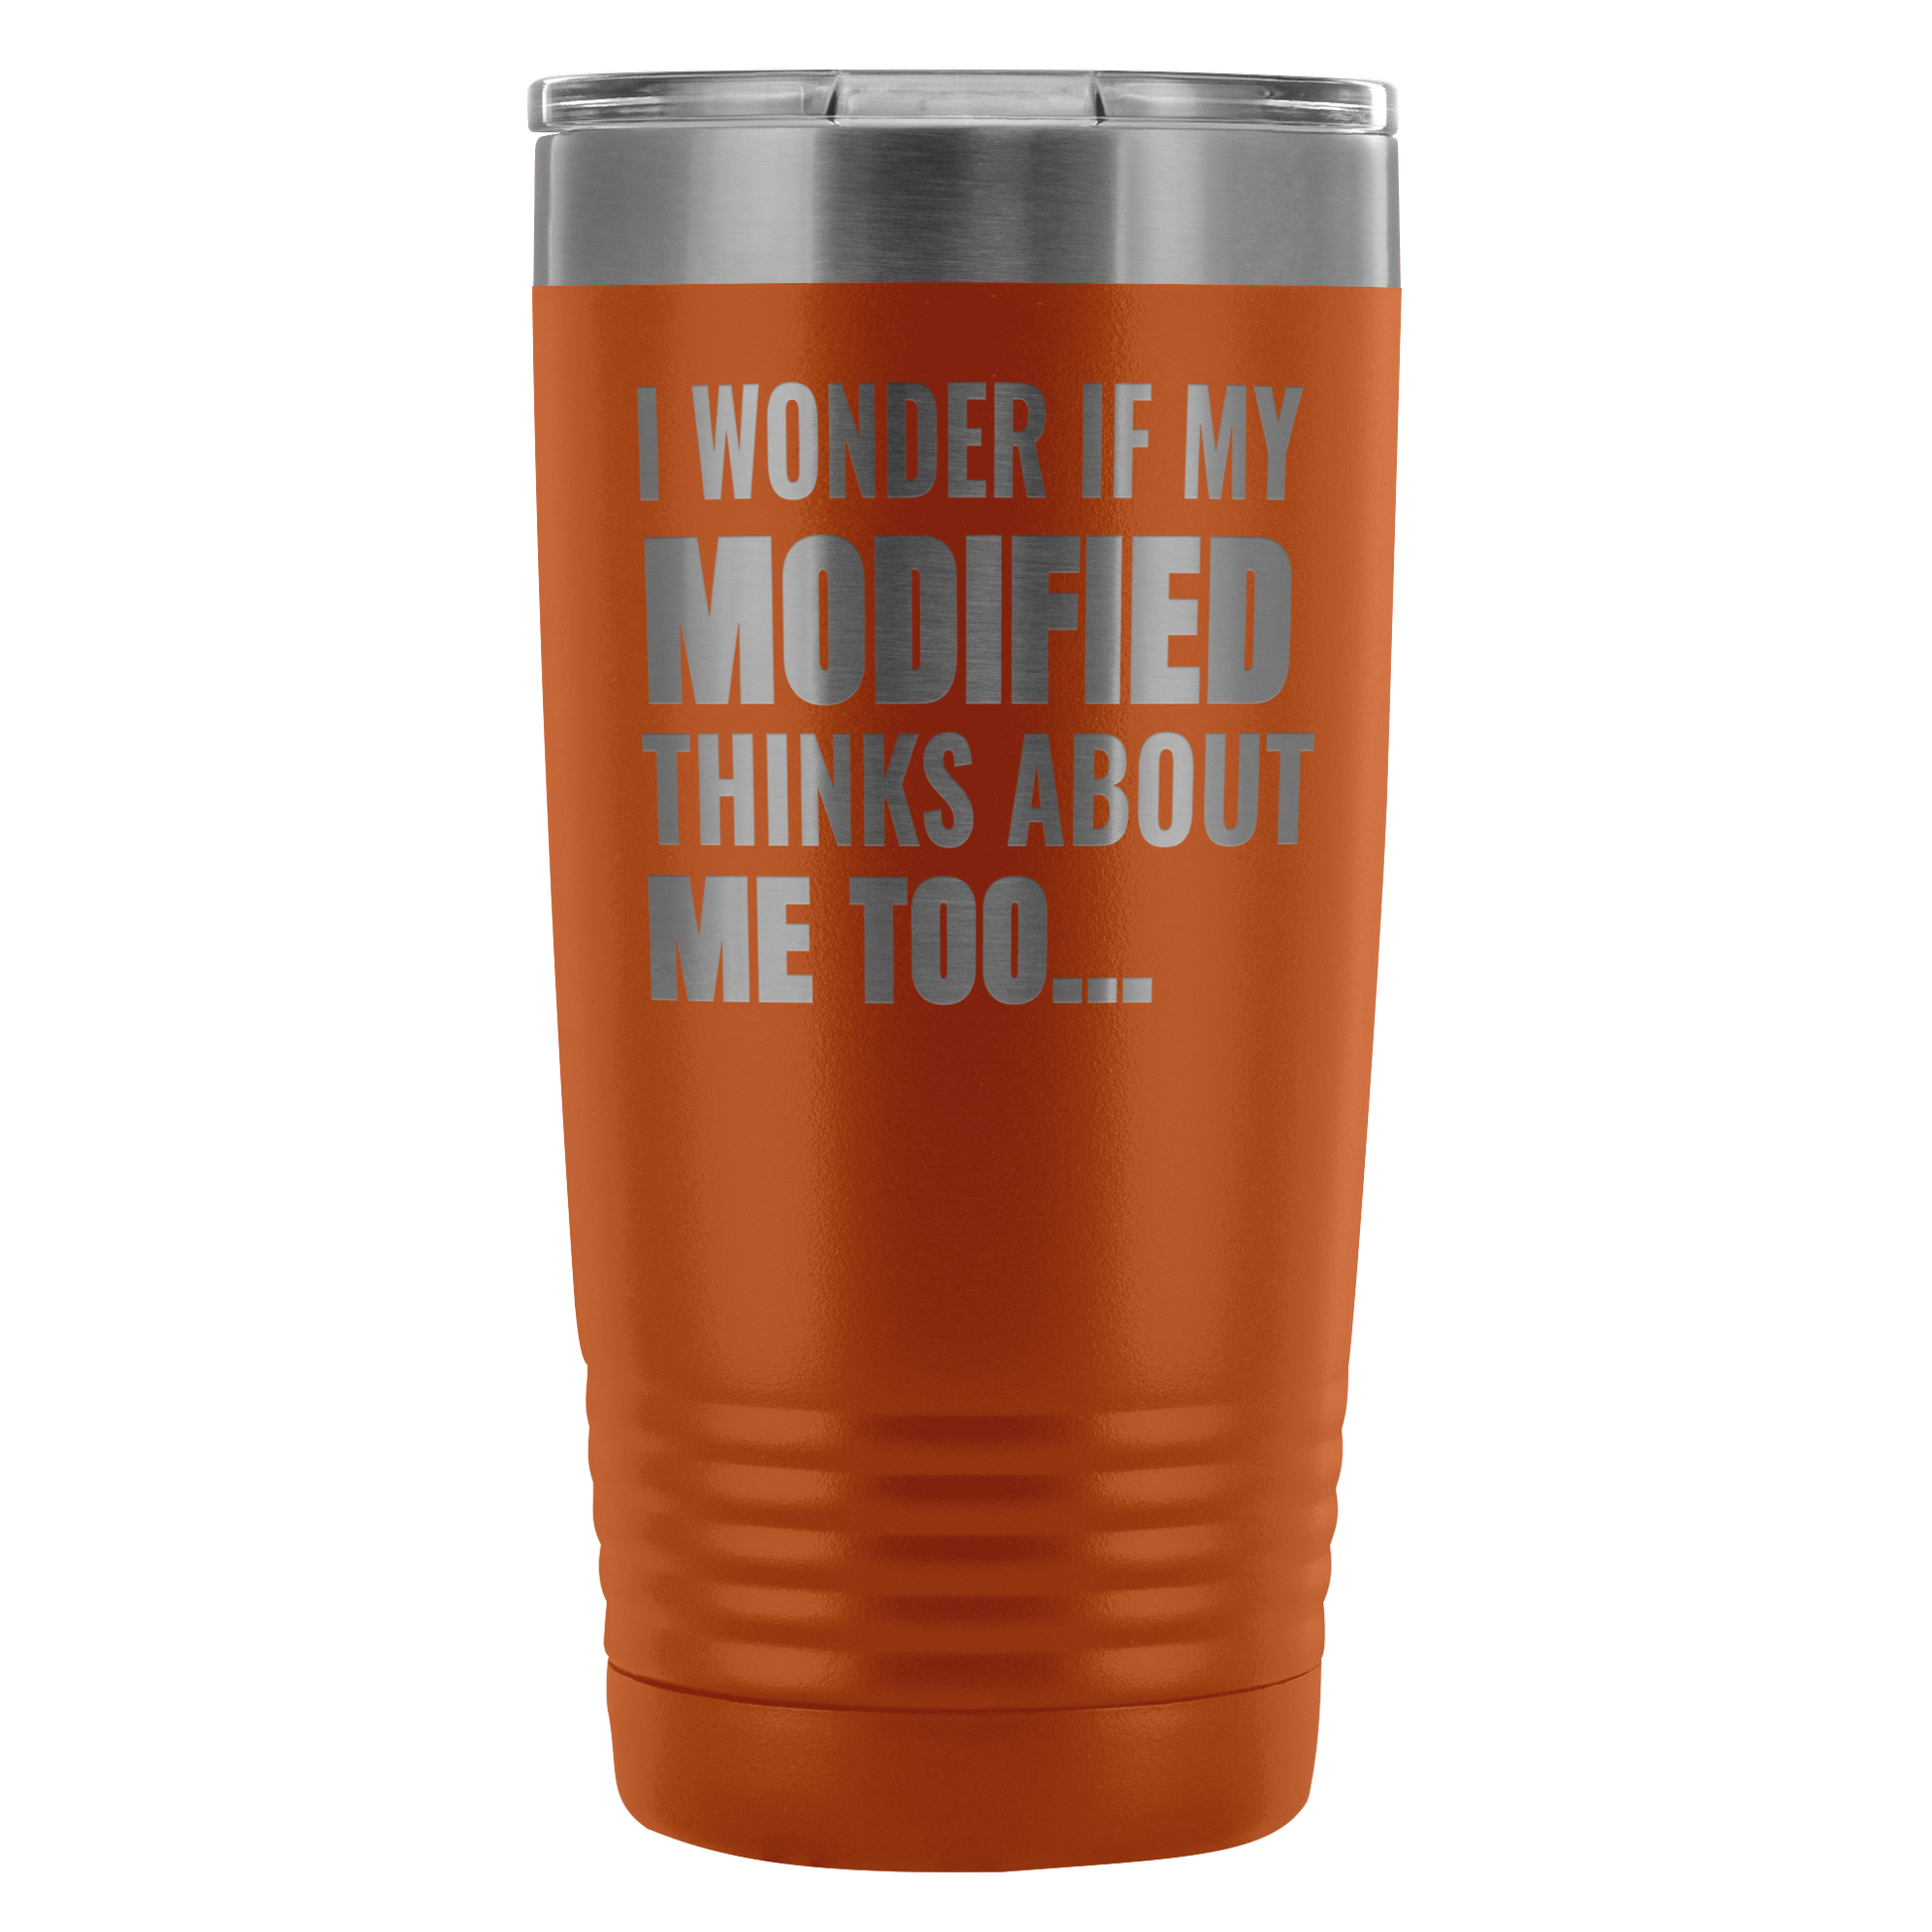 I Wonder If My Modified Thinks About Me Too 20 Oz Travel Tumbler - Turn Left T-Shirts Racewear